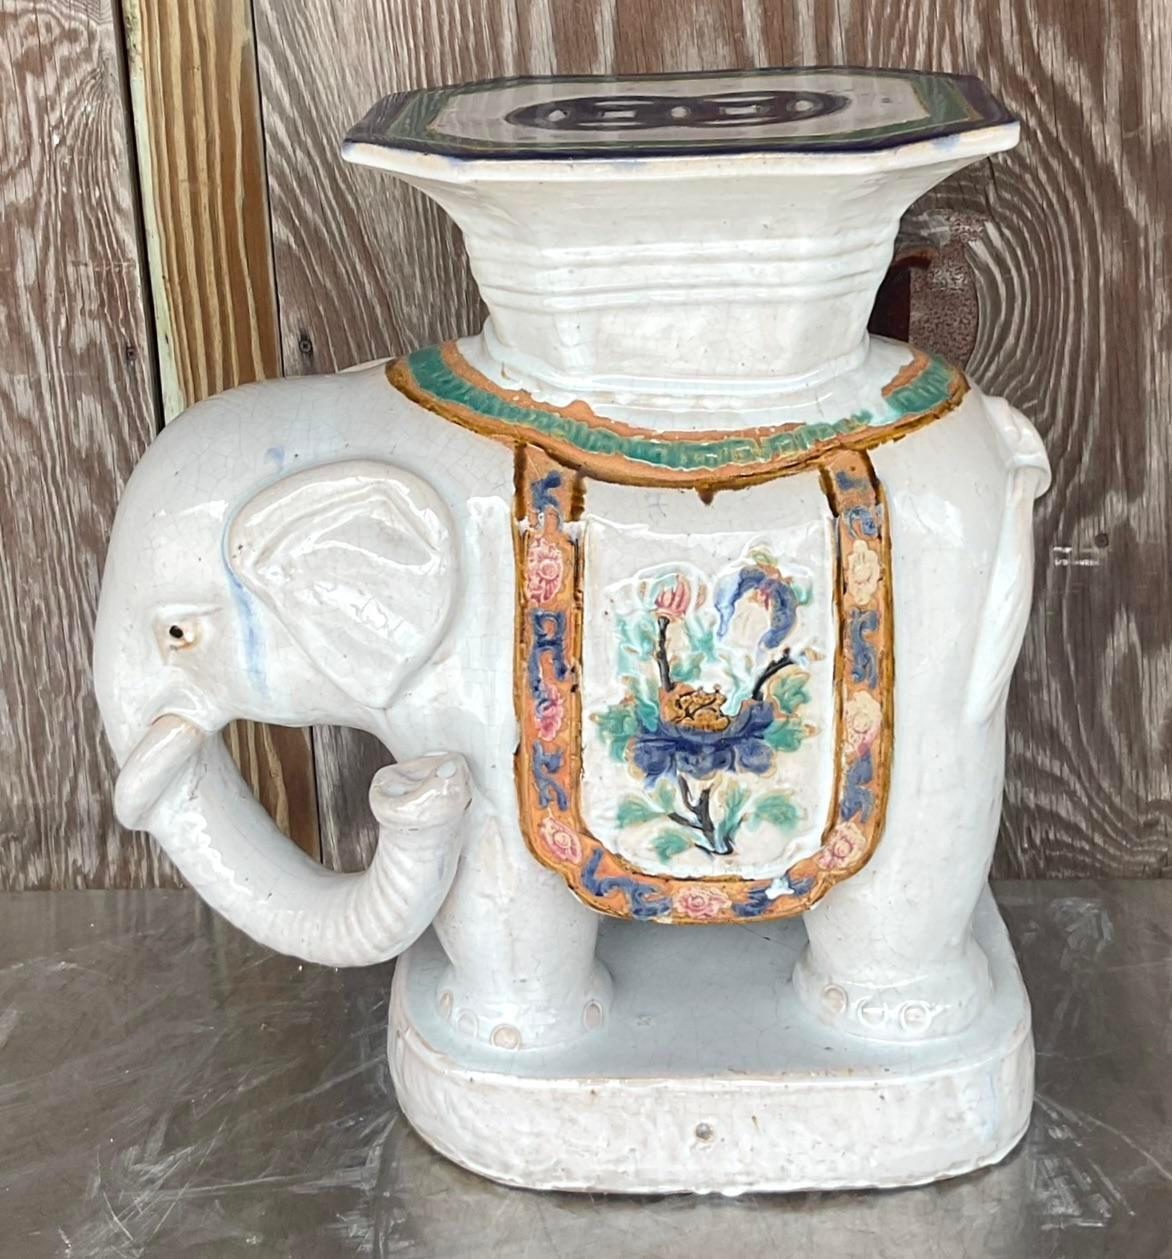 A fabulous vintage Boho low stool. A chic elephant with beautiful hand painted detail. A high gloss glazed ceramic finish. Perfect indoors or outside. You decide! Acquired from a Palm Beach estate.